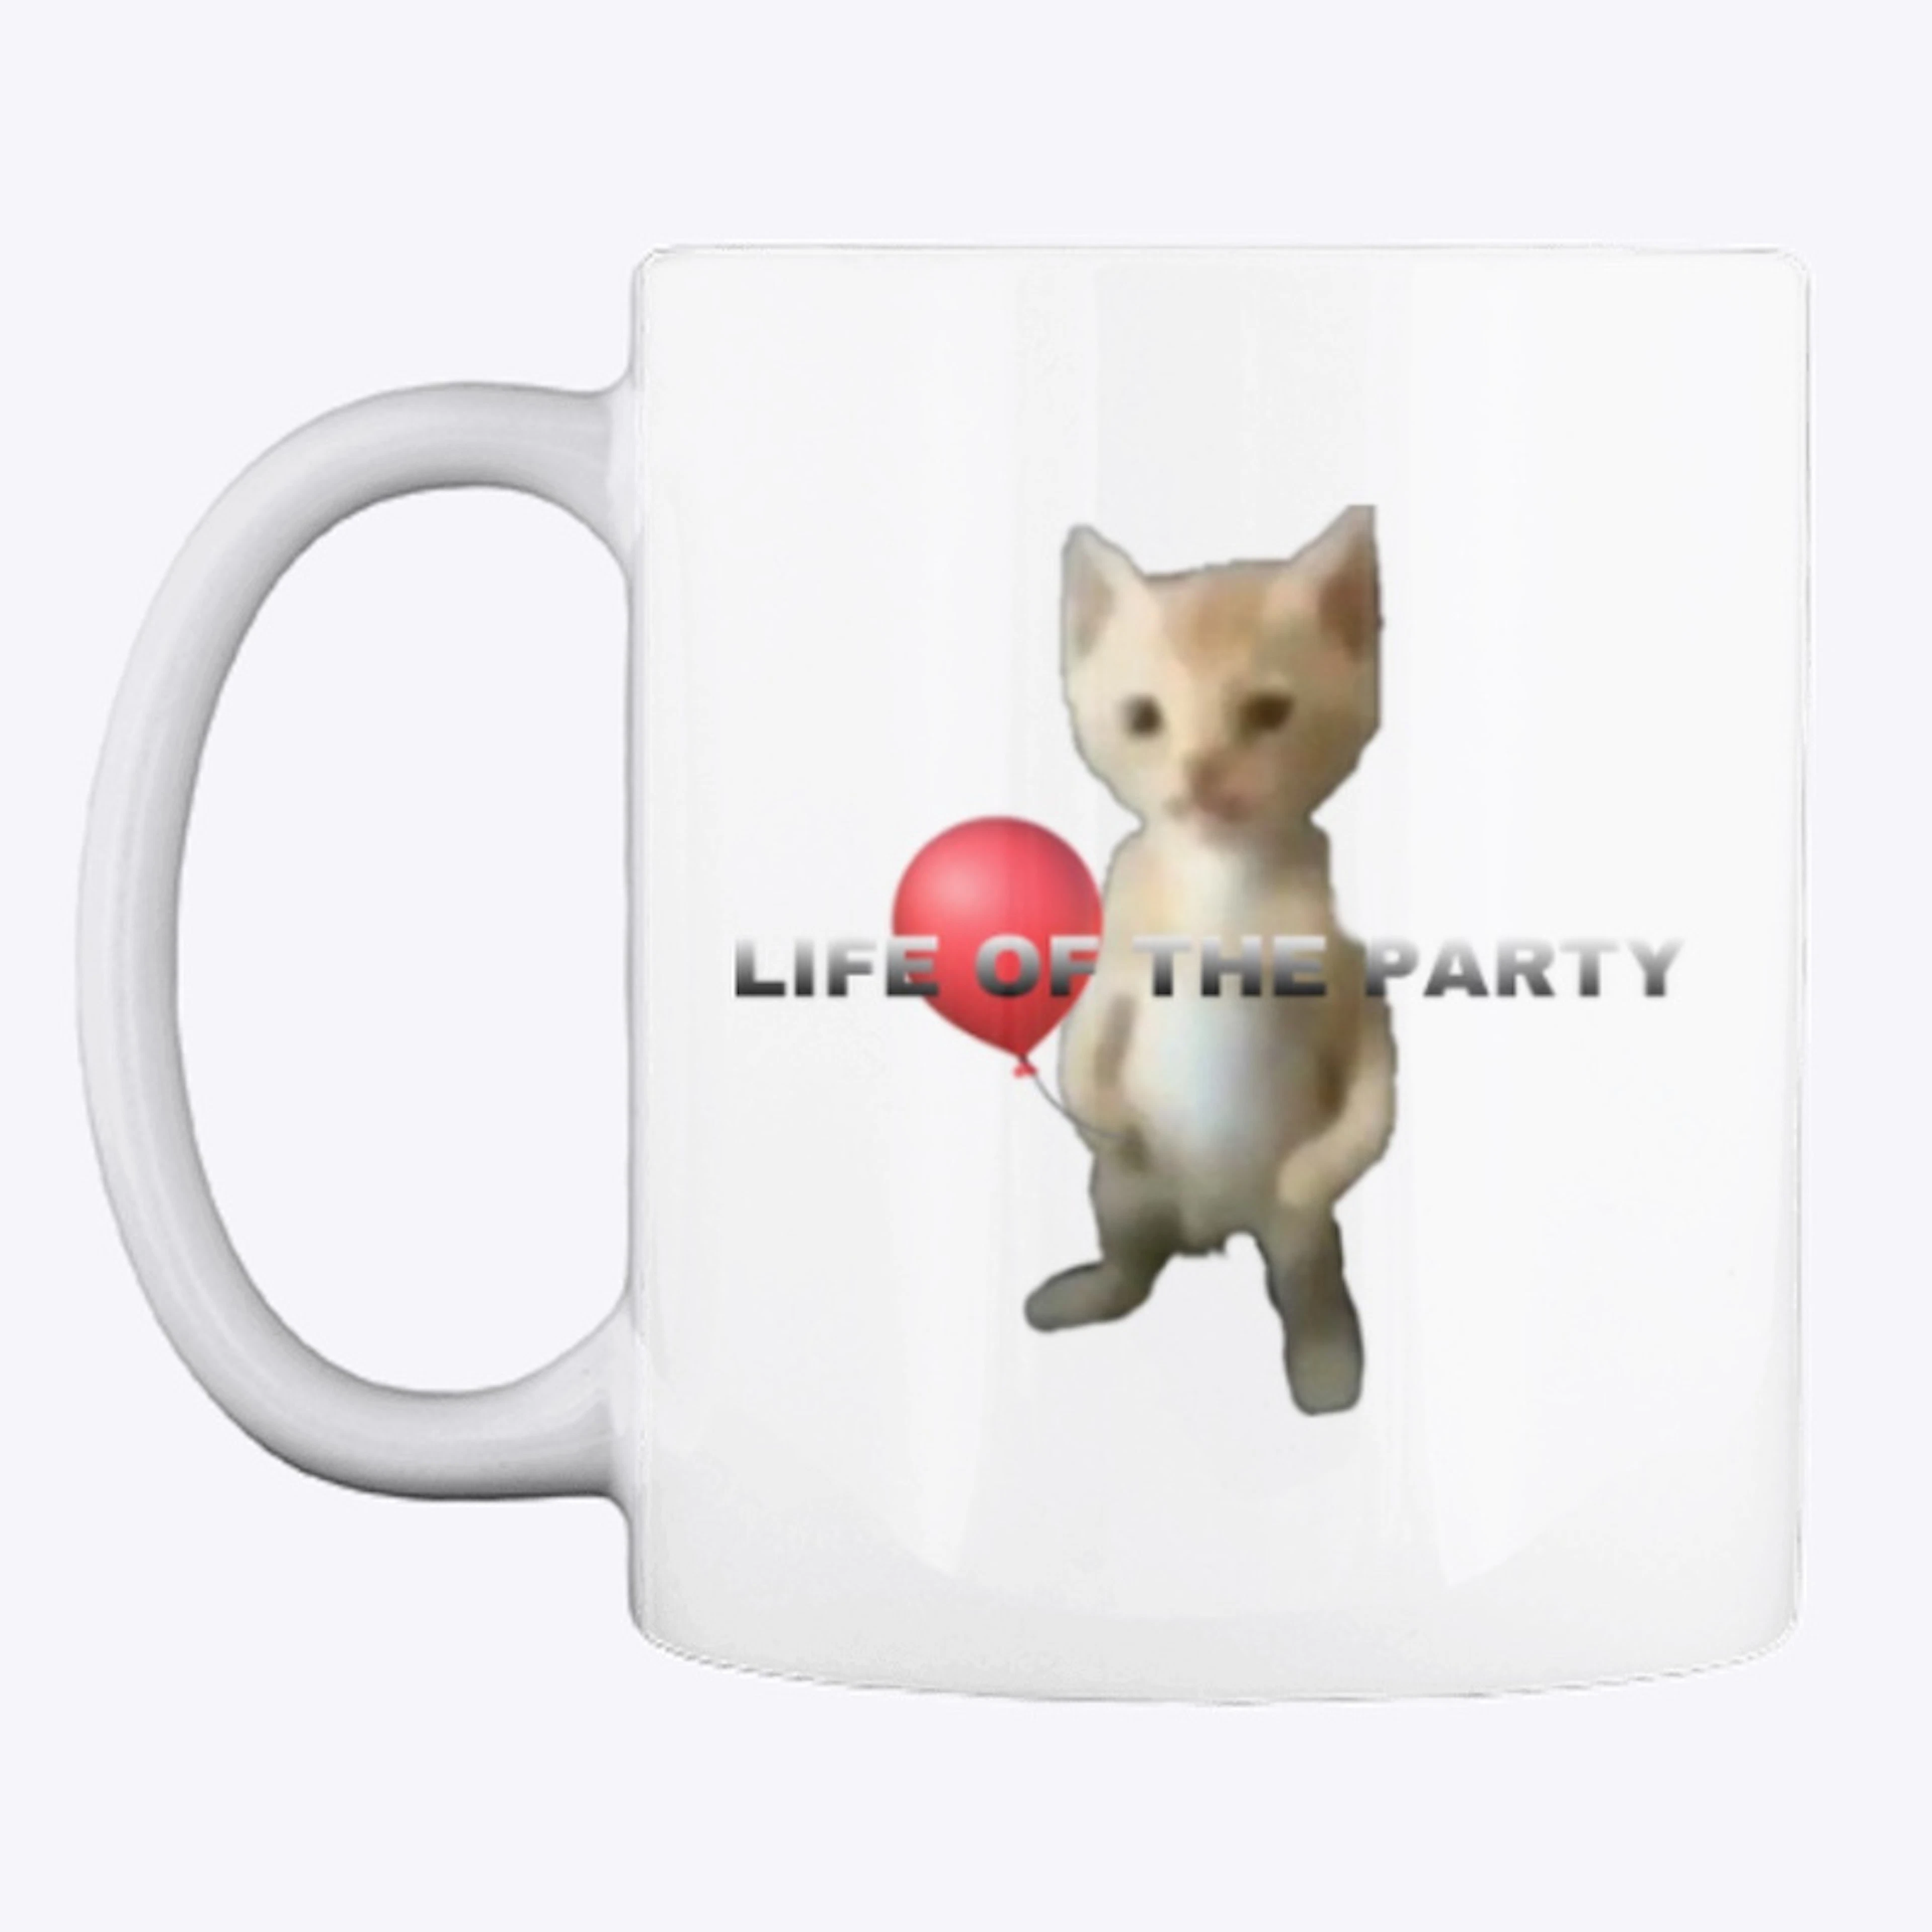 “Life of the party” cat with balloon